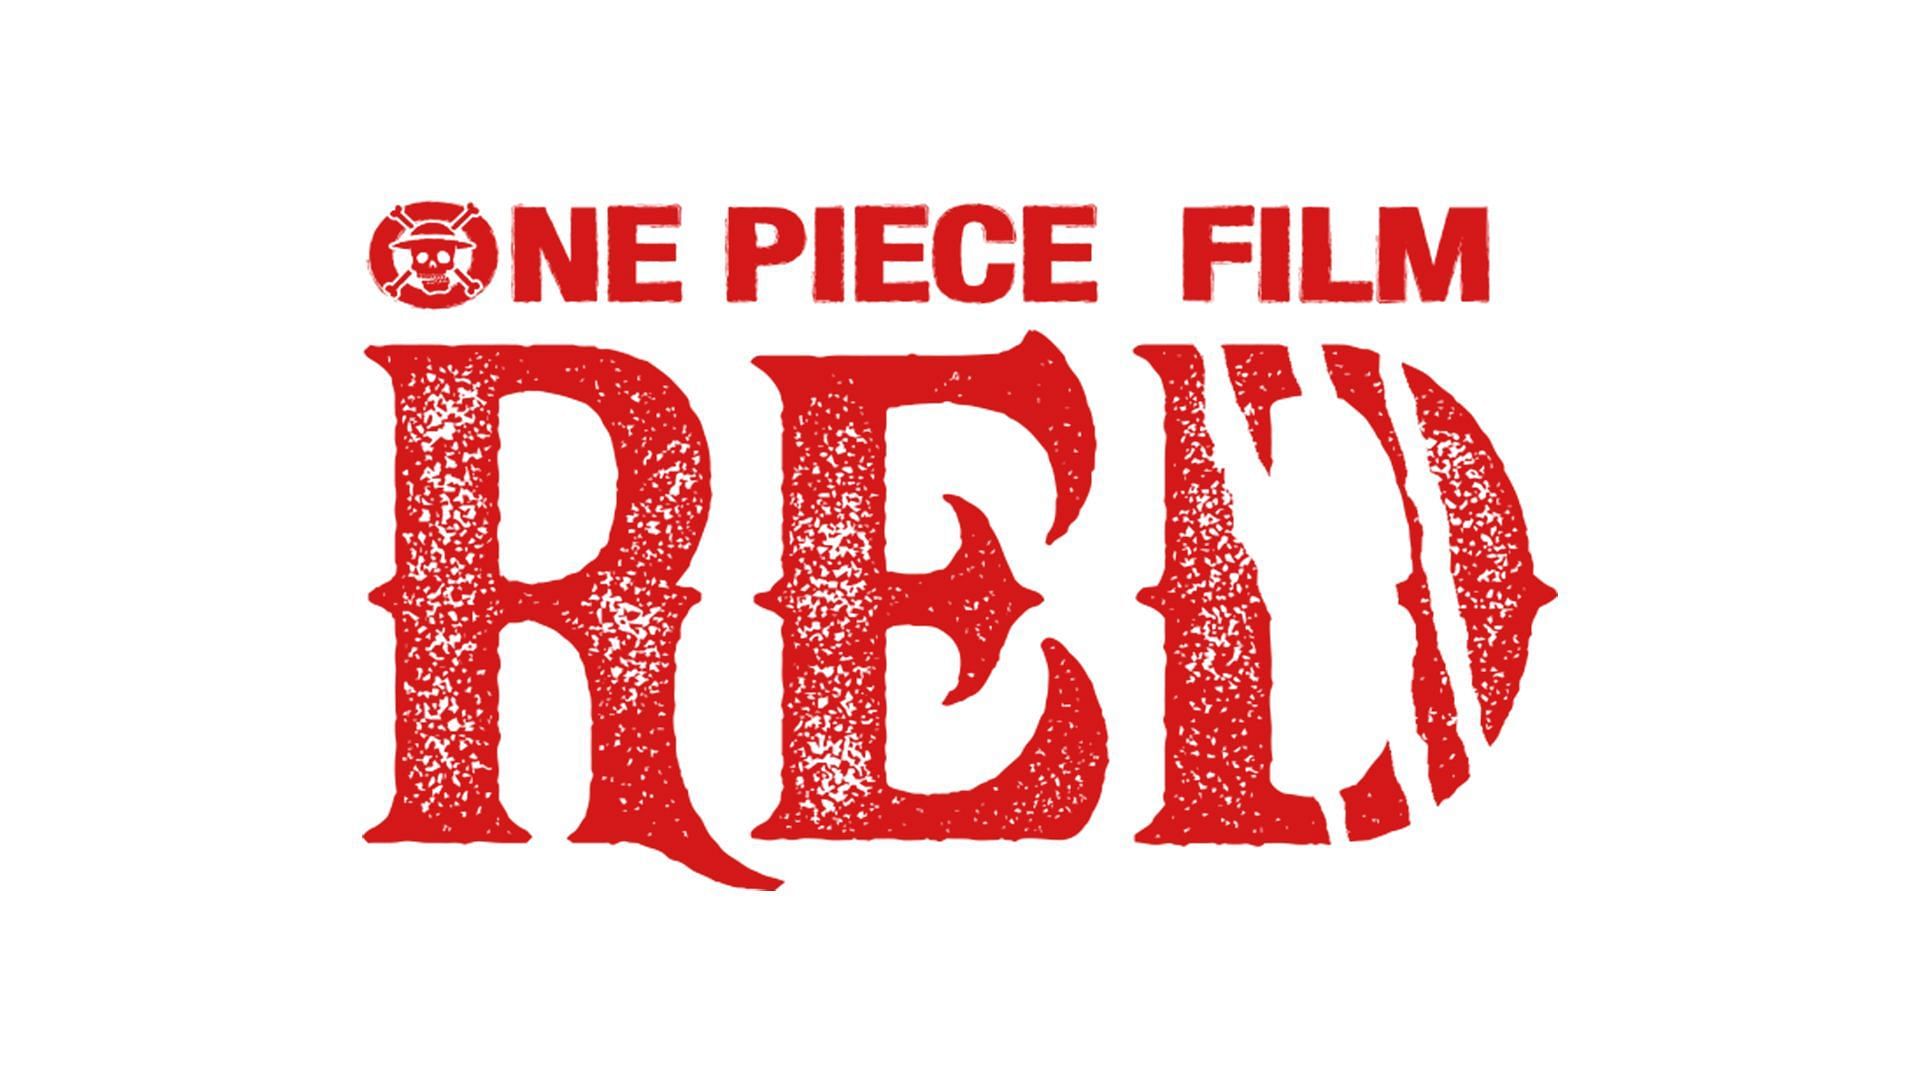 One Piece film 'Red' leaks: Release date and what to expect